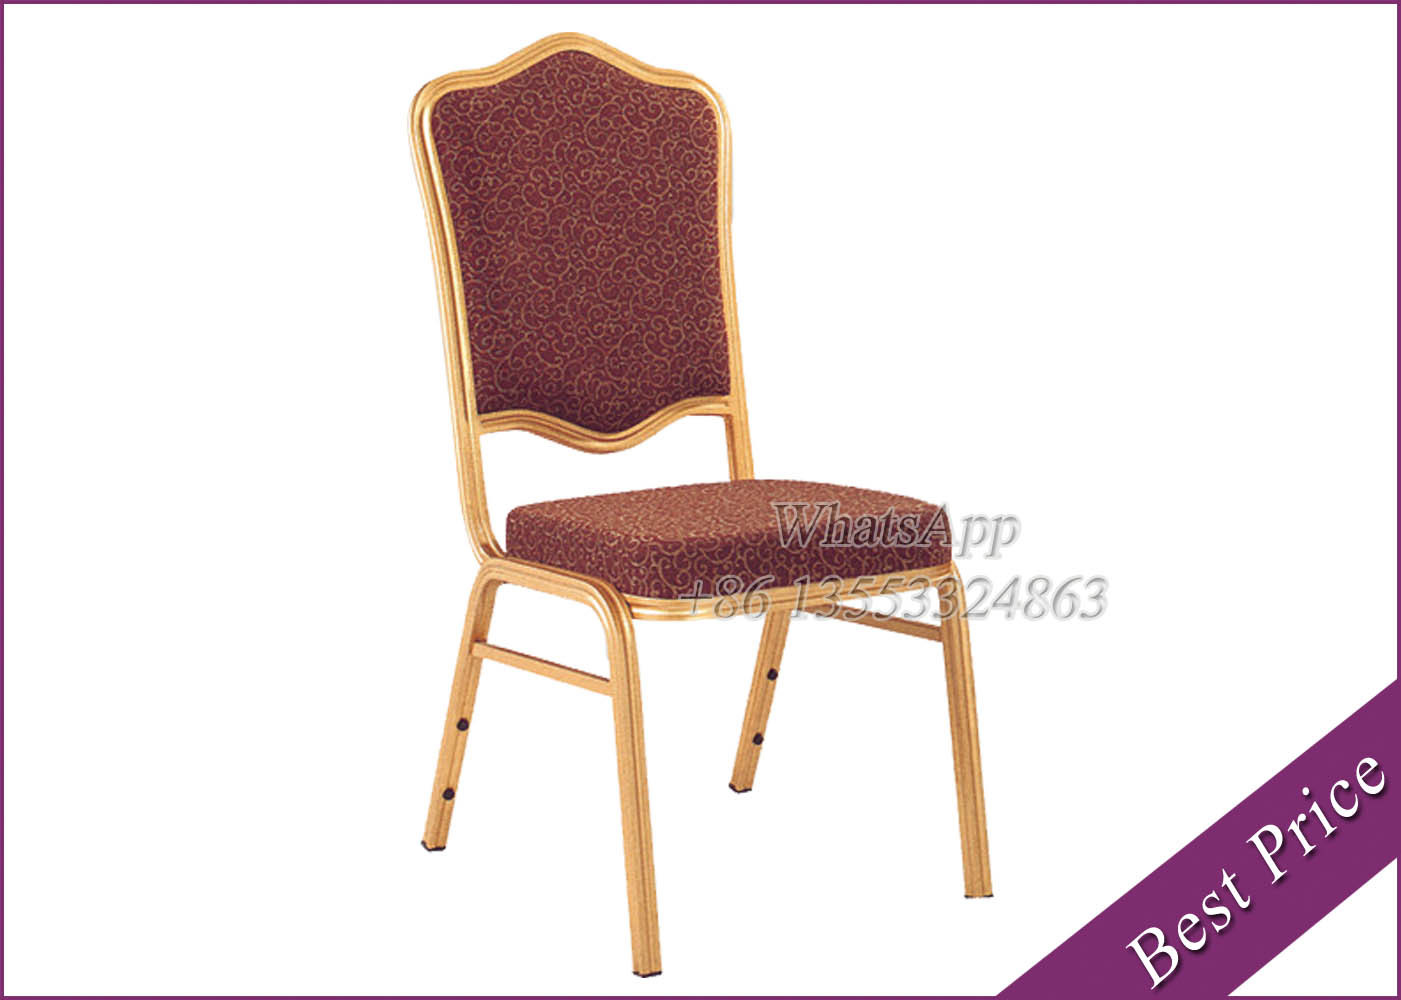 High Back Hotel Chair For sale at Low Price (YA-2)